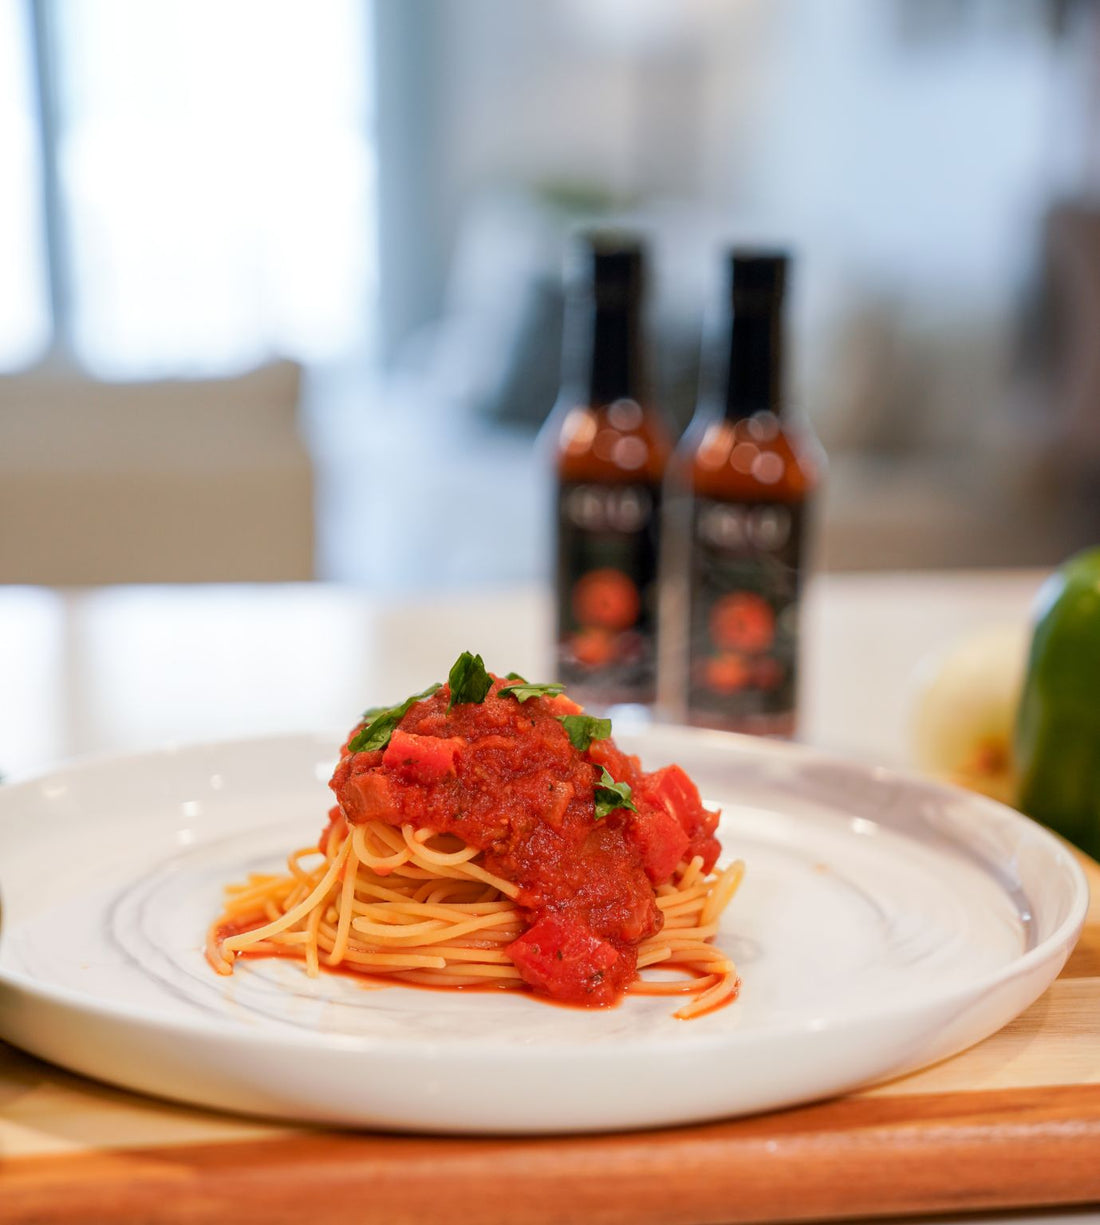 Spice Up Your Holidays with KRU Food’s Spicy Spaghetti Sauce Recipe!